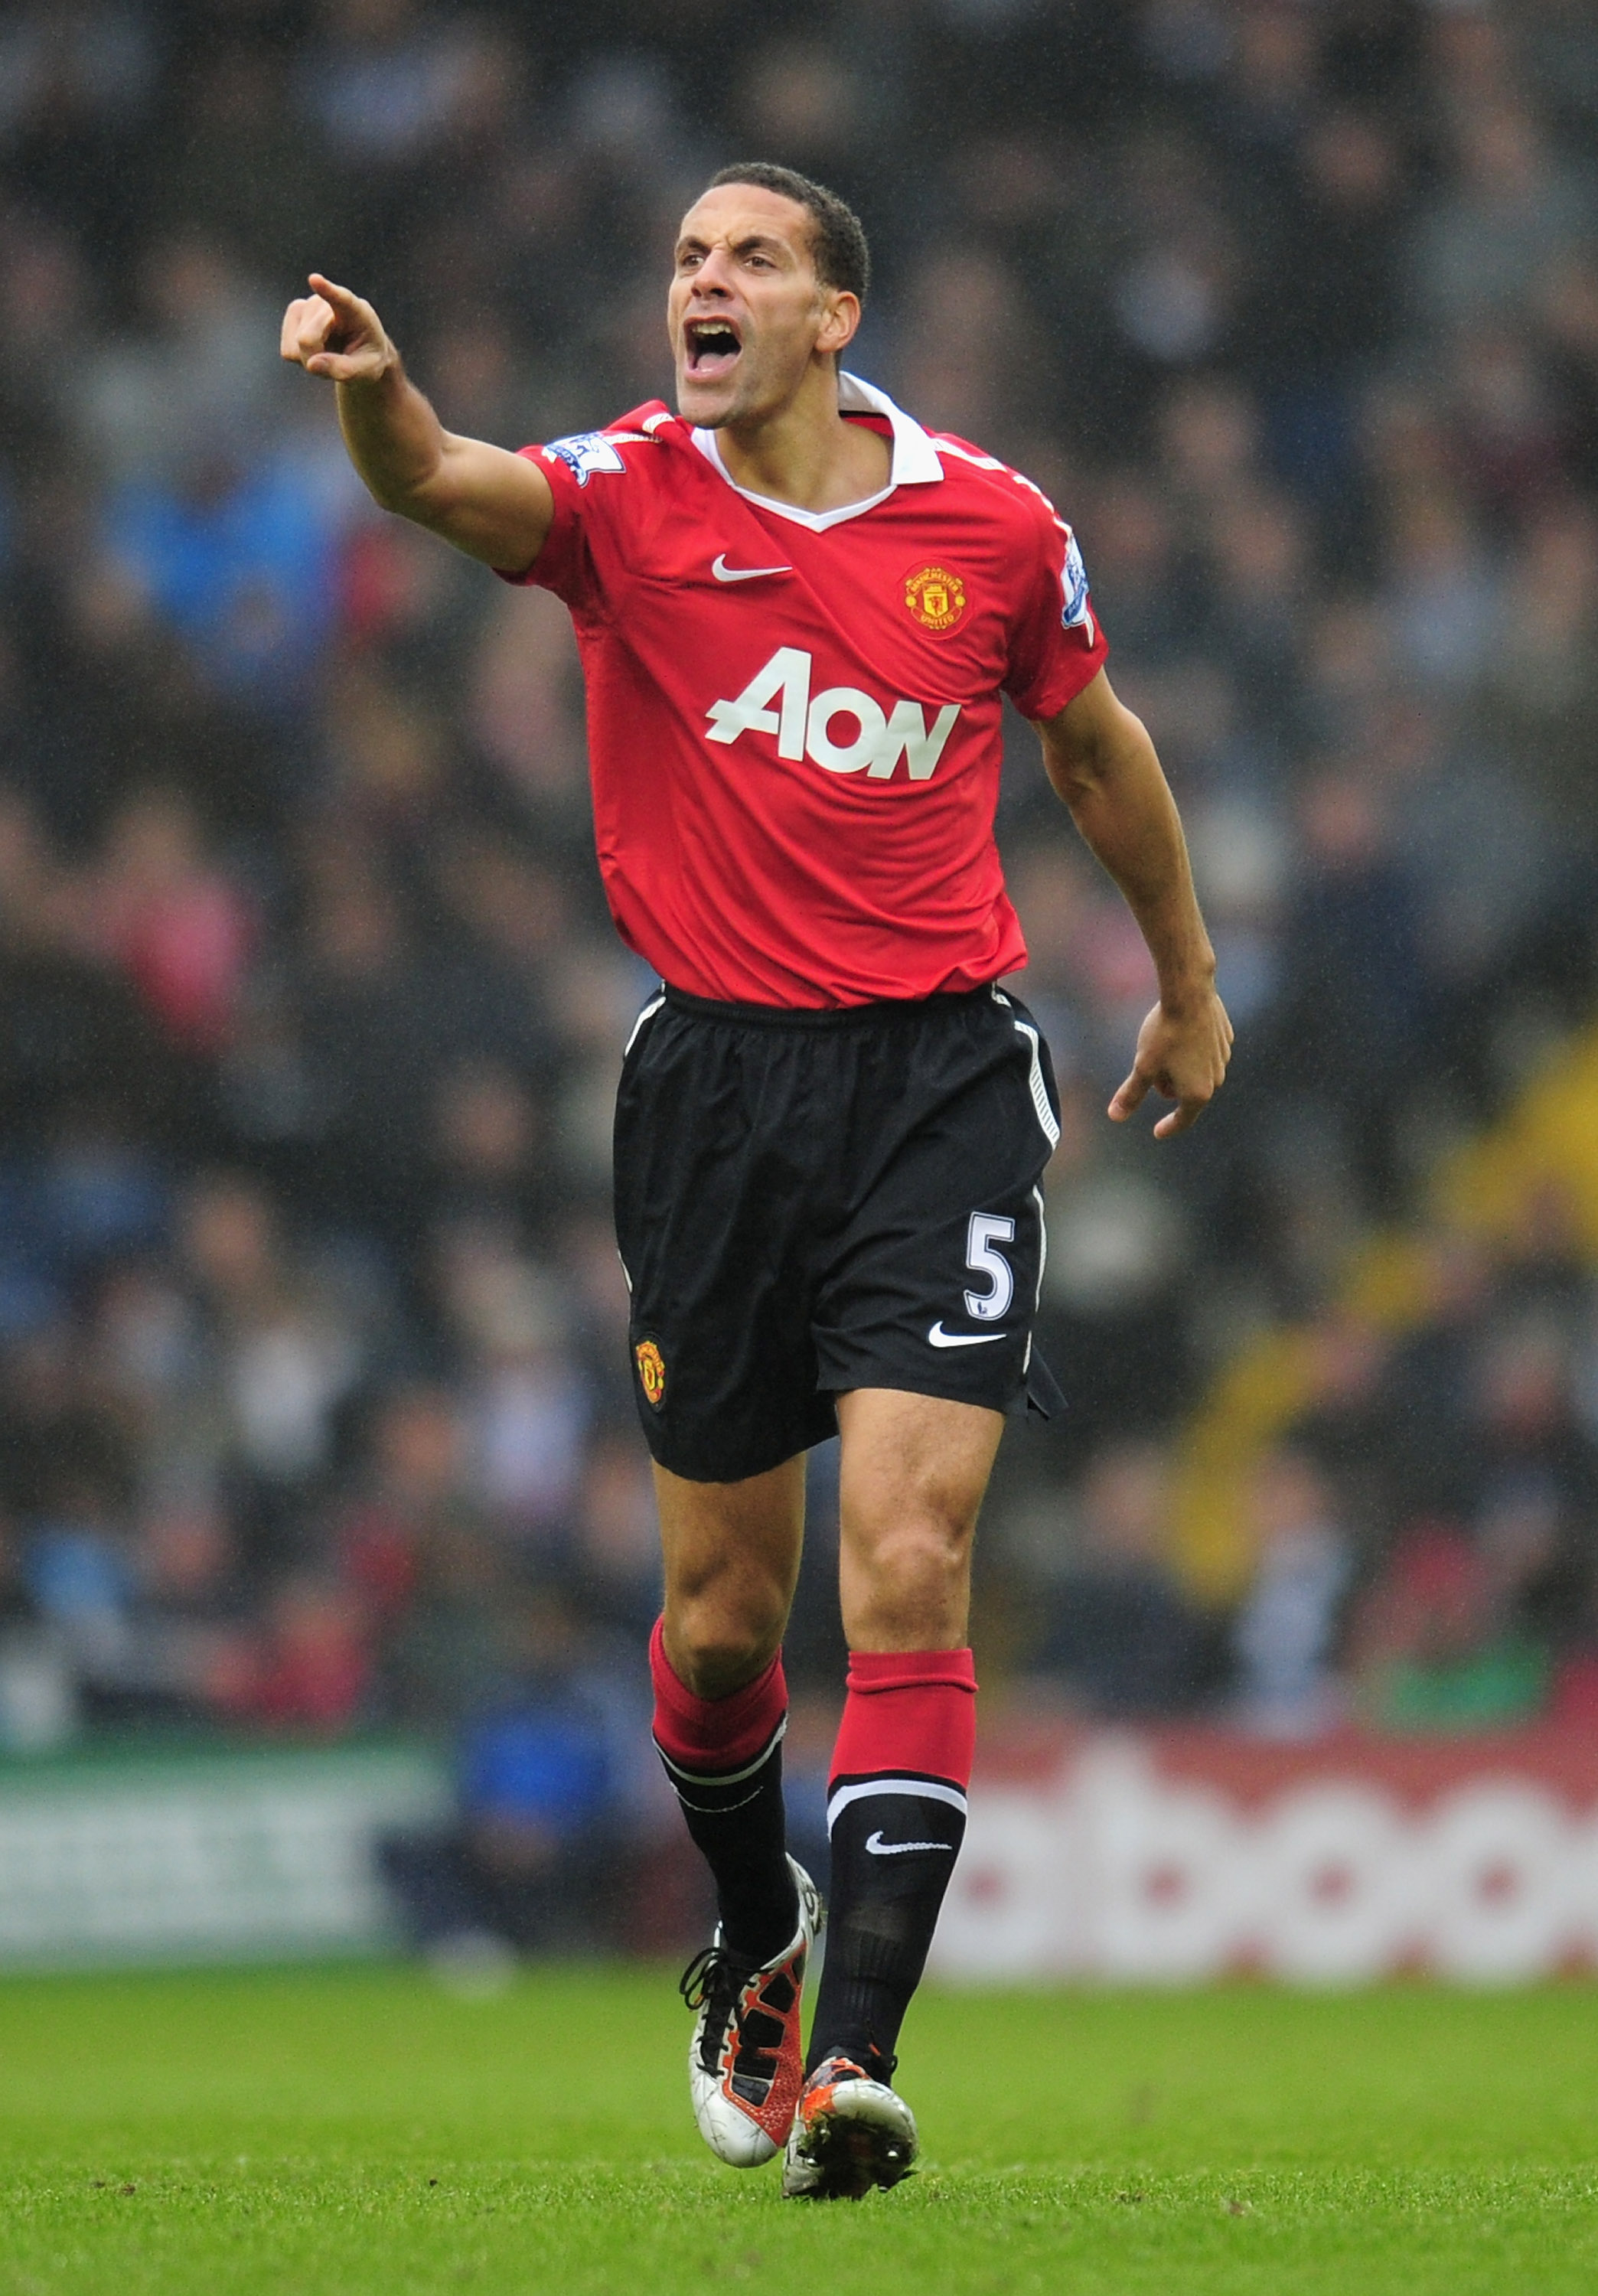 WEST BROMWICH, ENGLAND - JANUARY 01:  Rio Ferdinand of Manchester United shouts instructions during the Barclays Premier League match between West Bromich Albion and Manchester United at The Hawthorns on January 1, 2011 in West Bromwich, England.  (Photo